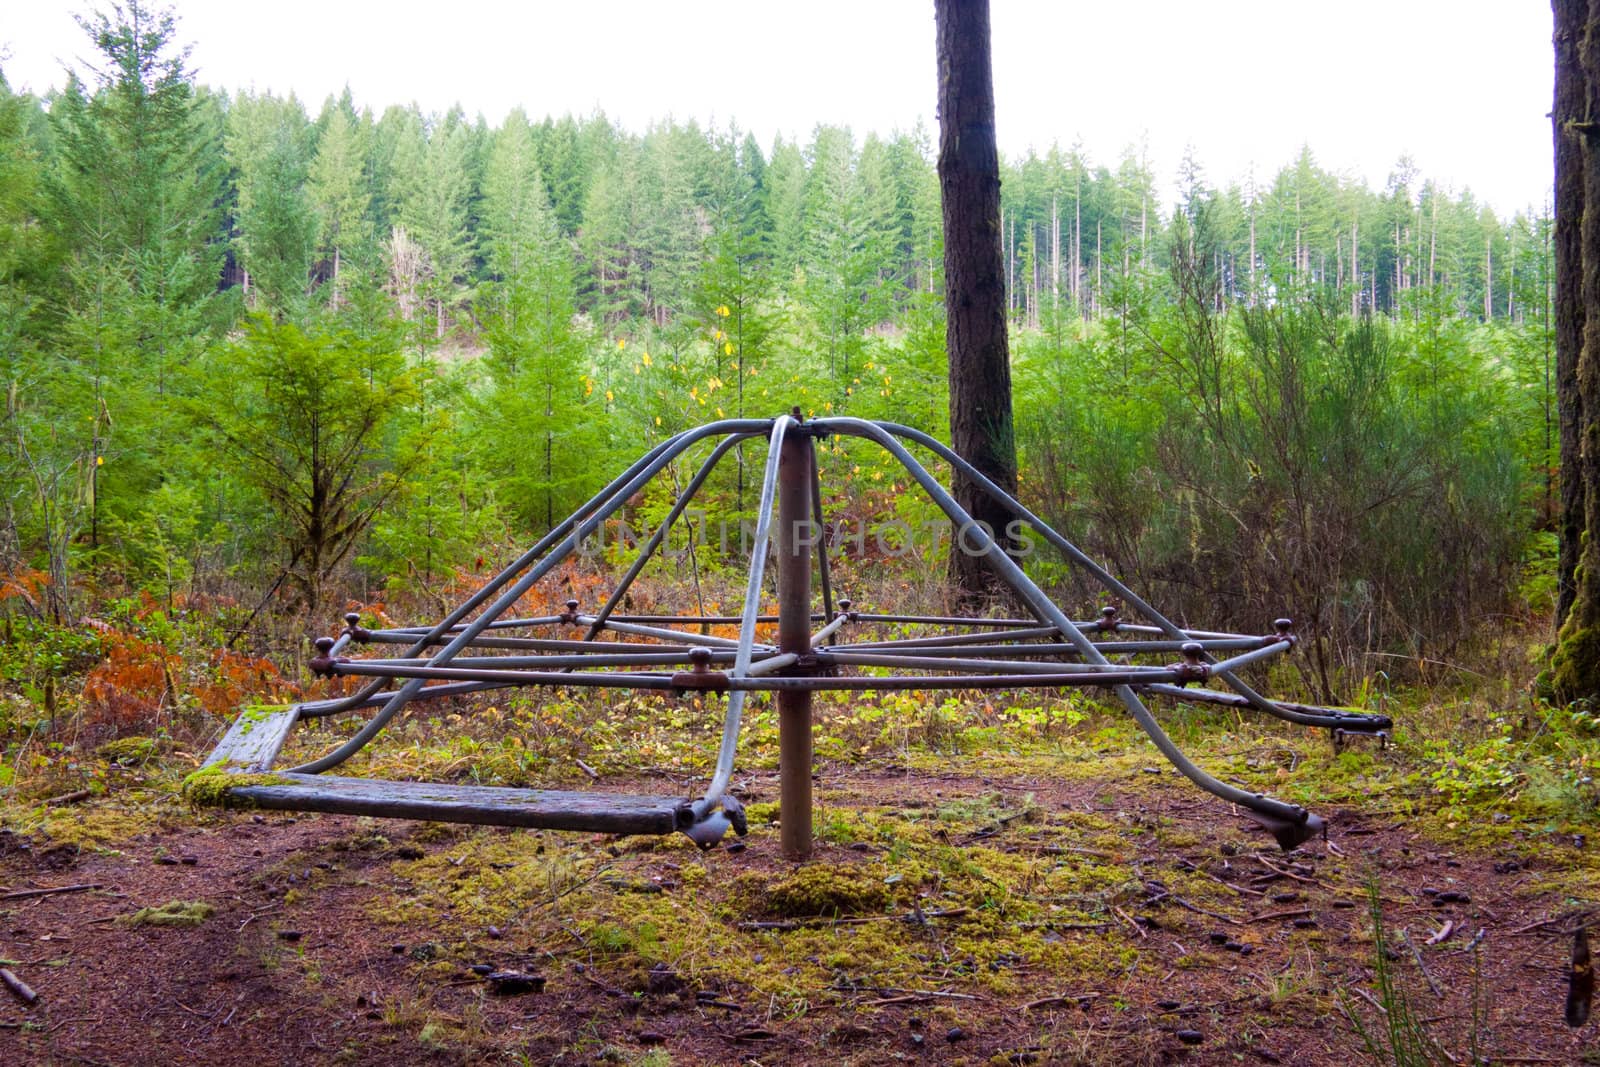 An abandoned merry-go-round in the forest with overgrown vegetation and greenery surrounding it.